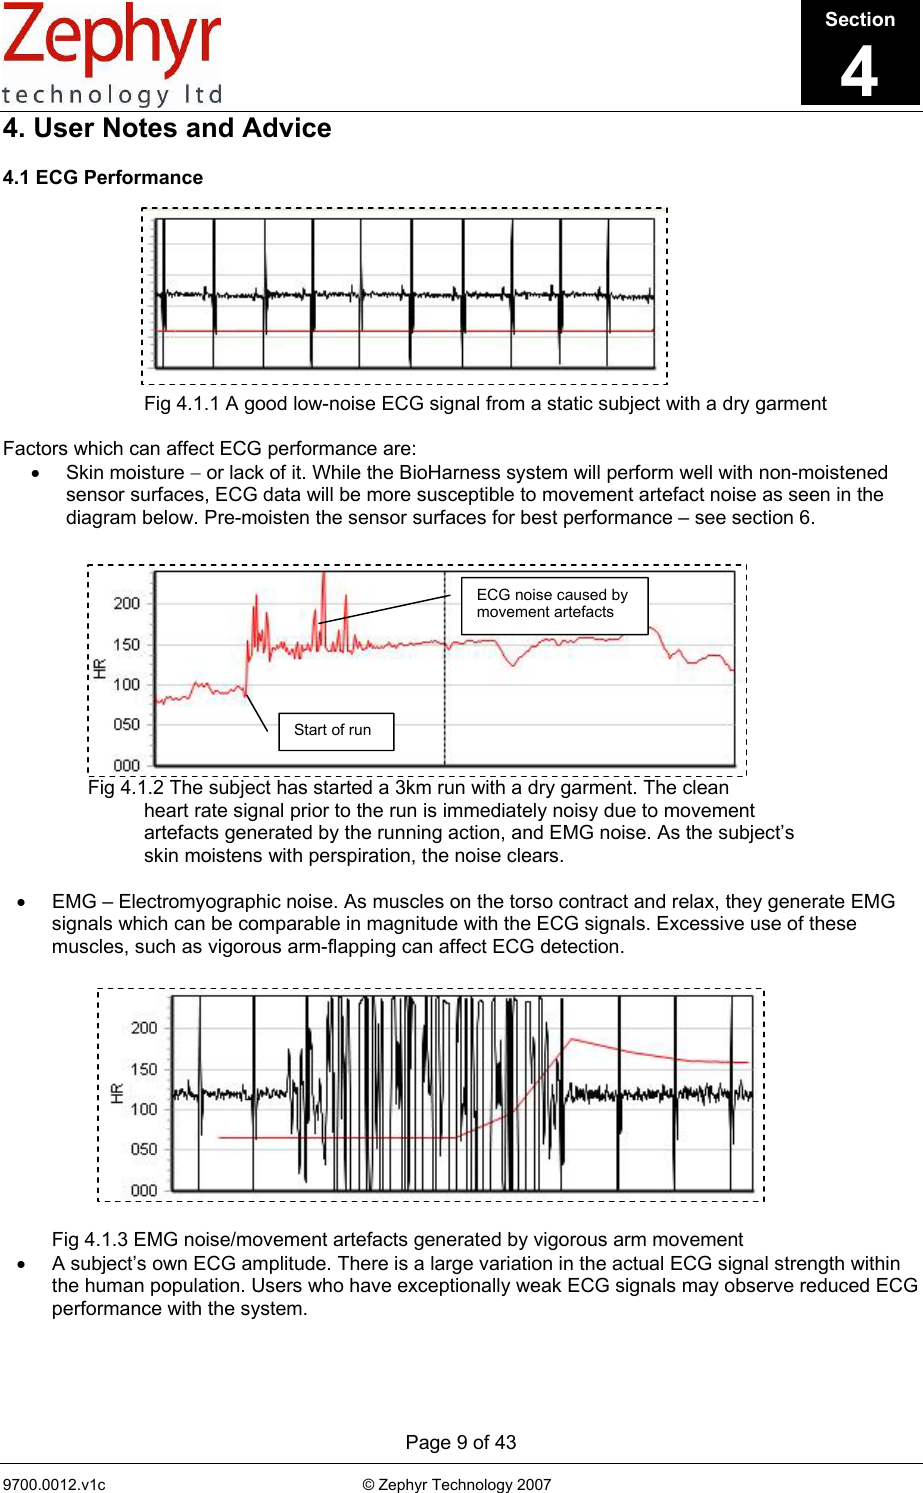      Page 9 of 43 9700.0012.v1c                                                           © Zephyr Technology 2007                                                            4. User Notes and Advice  4.1 ECG Performance              Fig 4.1.1 A good low-noise ECG signal from a static subject with a dry garment  Factors which can affect ECG performance are: • Skin moisture − or lack of it. While the BioHarness system will perform well with non-moistened sensor surfaces, ECG data will be more susceptible to movement artefact noise as seen in the diagram below. Pre-moisten the sensor surfaces for best performance – see section 6.                Fig 4.1.2 The subject has started a 3km run with a dry garment. The clean     heart rate signal prior to the run is immediately noisy due to movement     artefacts generated by the running action, and EMG noise. As the subject’s     skin moistens with perspiration, the noise clears.  •  EMG – Electromyographic noise. As muscles on the torso contract and relax, they generate EMG signals which can be comparable in magnitude with the ECG signals. Excessive use of these muscles, such as vigorous arm-flapping can affect ECG detection.                     Fig 4.1.3 EMG noise/movement artefacts generated by vigorous arm movement •  A subject’s own ECG amplitude. There is a large variation in the actual ECG signal strength within the human population. Users who have exceptionally weak ECG signals may observe reduced ECG performance with the system.   Section4ECG noise caused by movement artefacts Start of run 